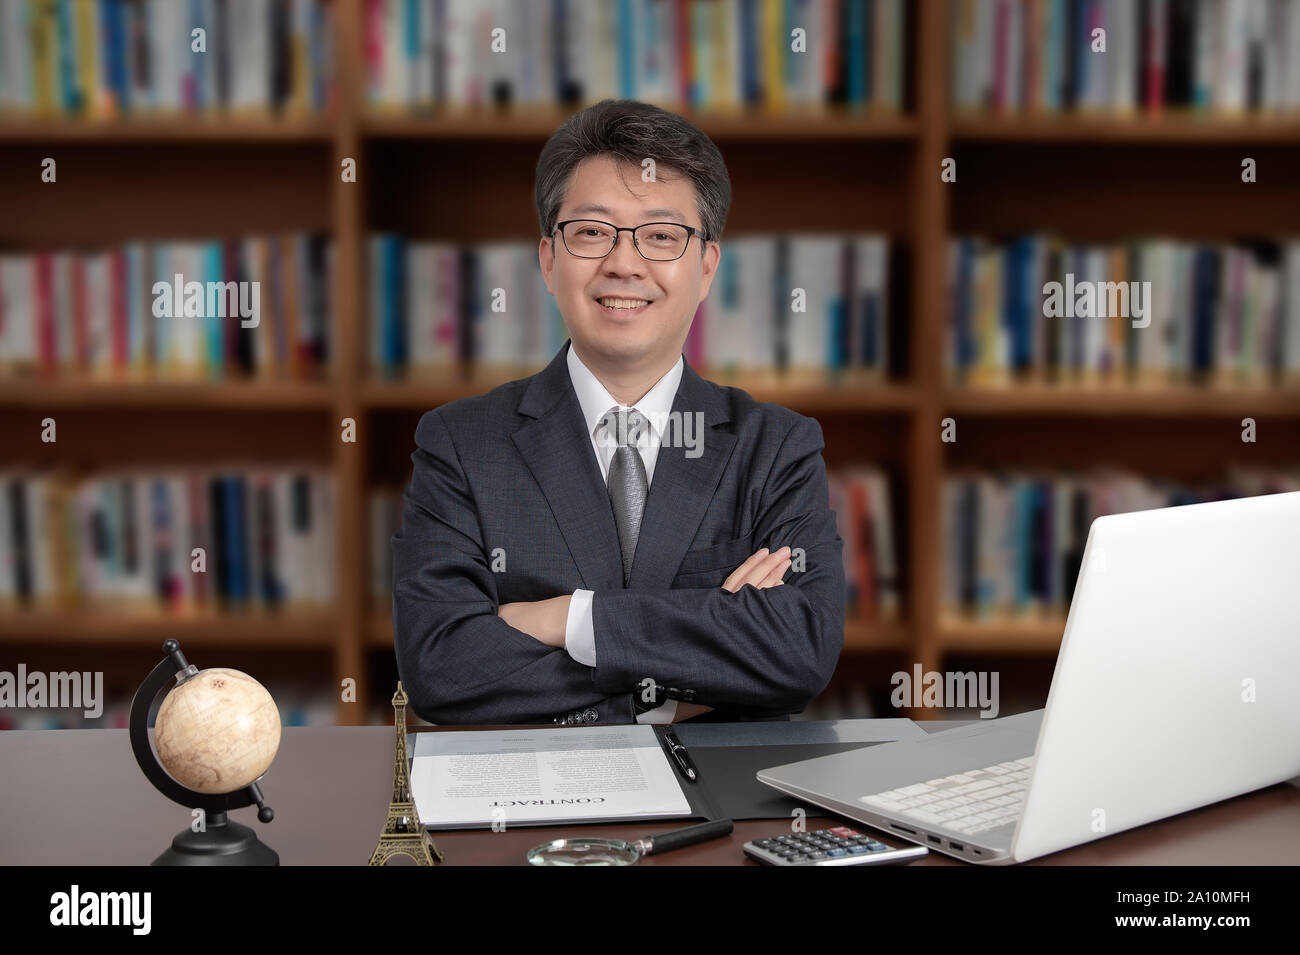 A portrait of an Asian middle-aged male businessman sitting at a desk Stock Photo